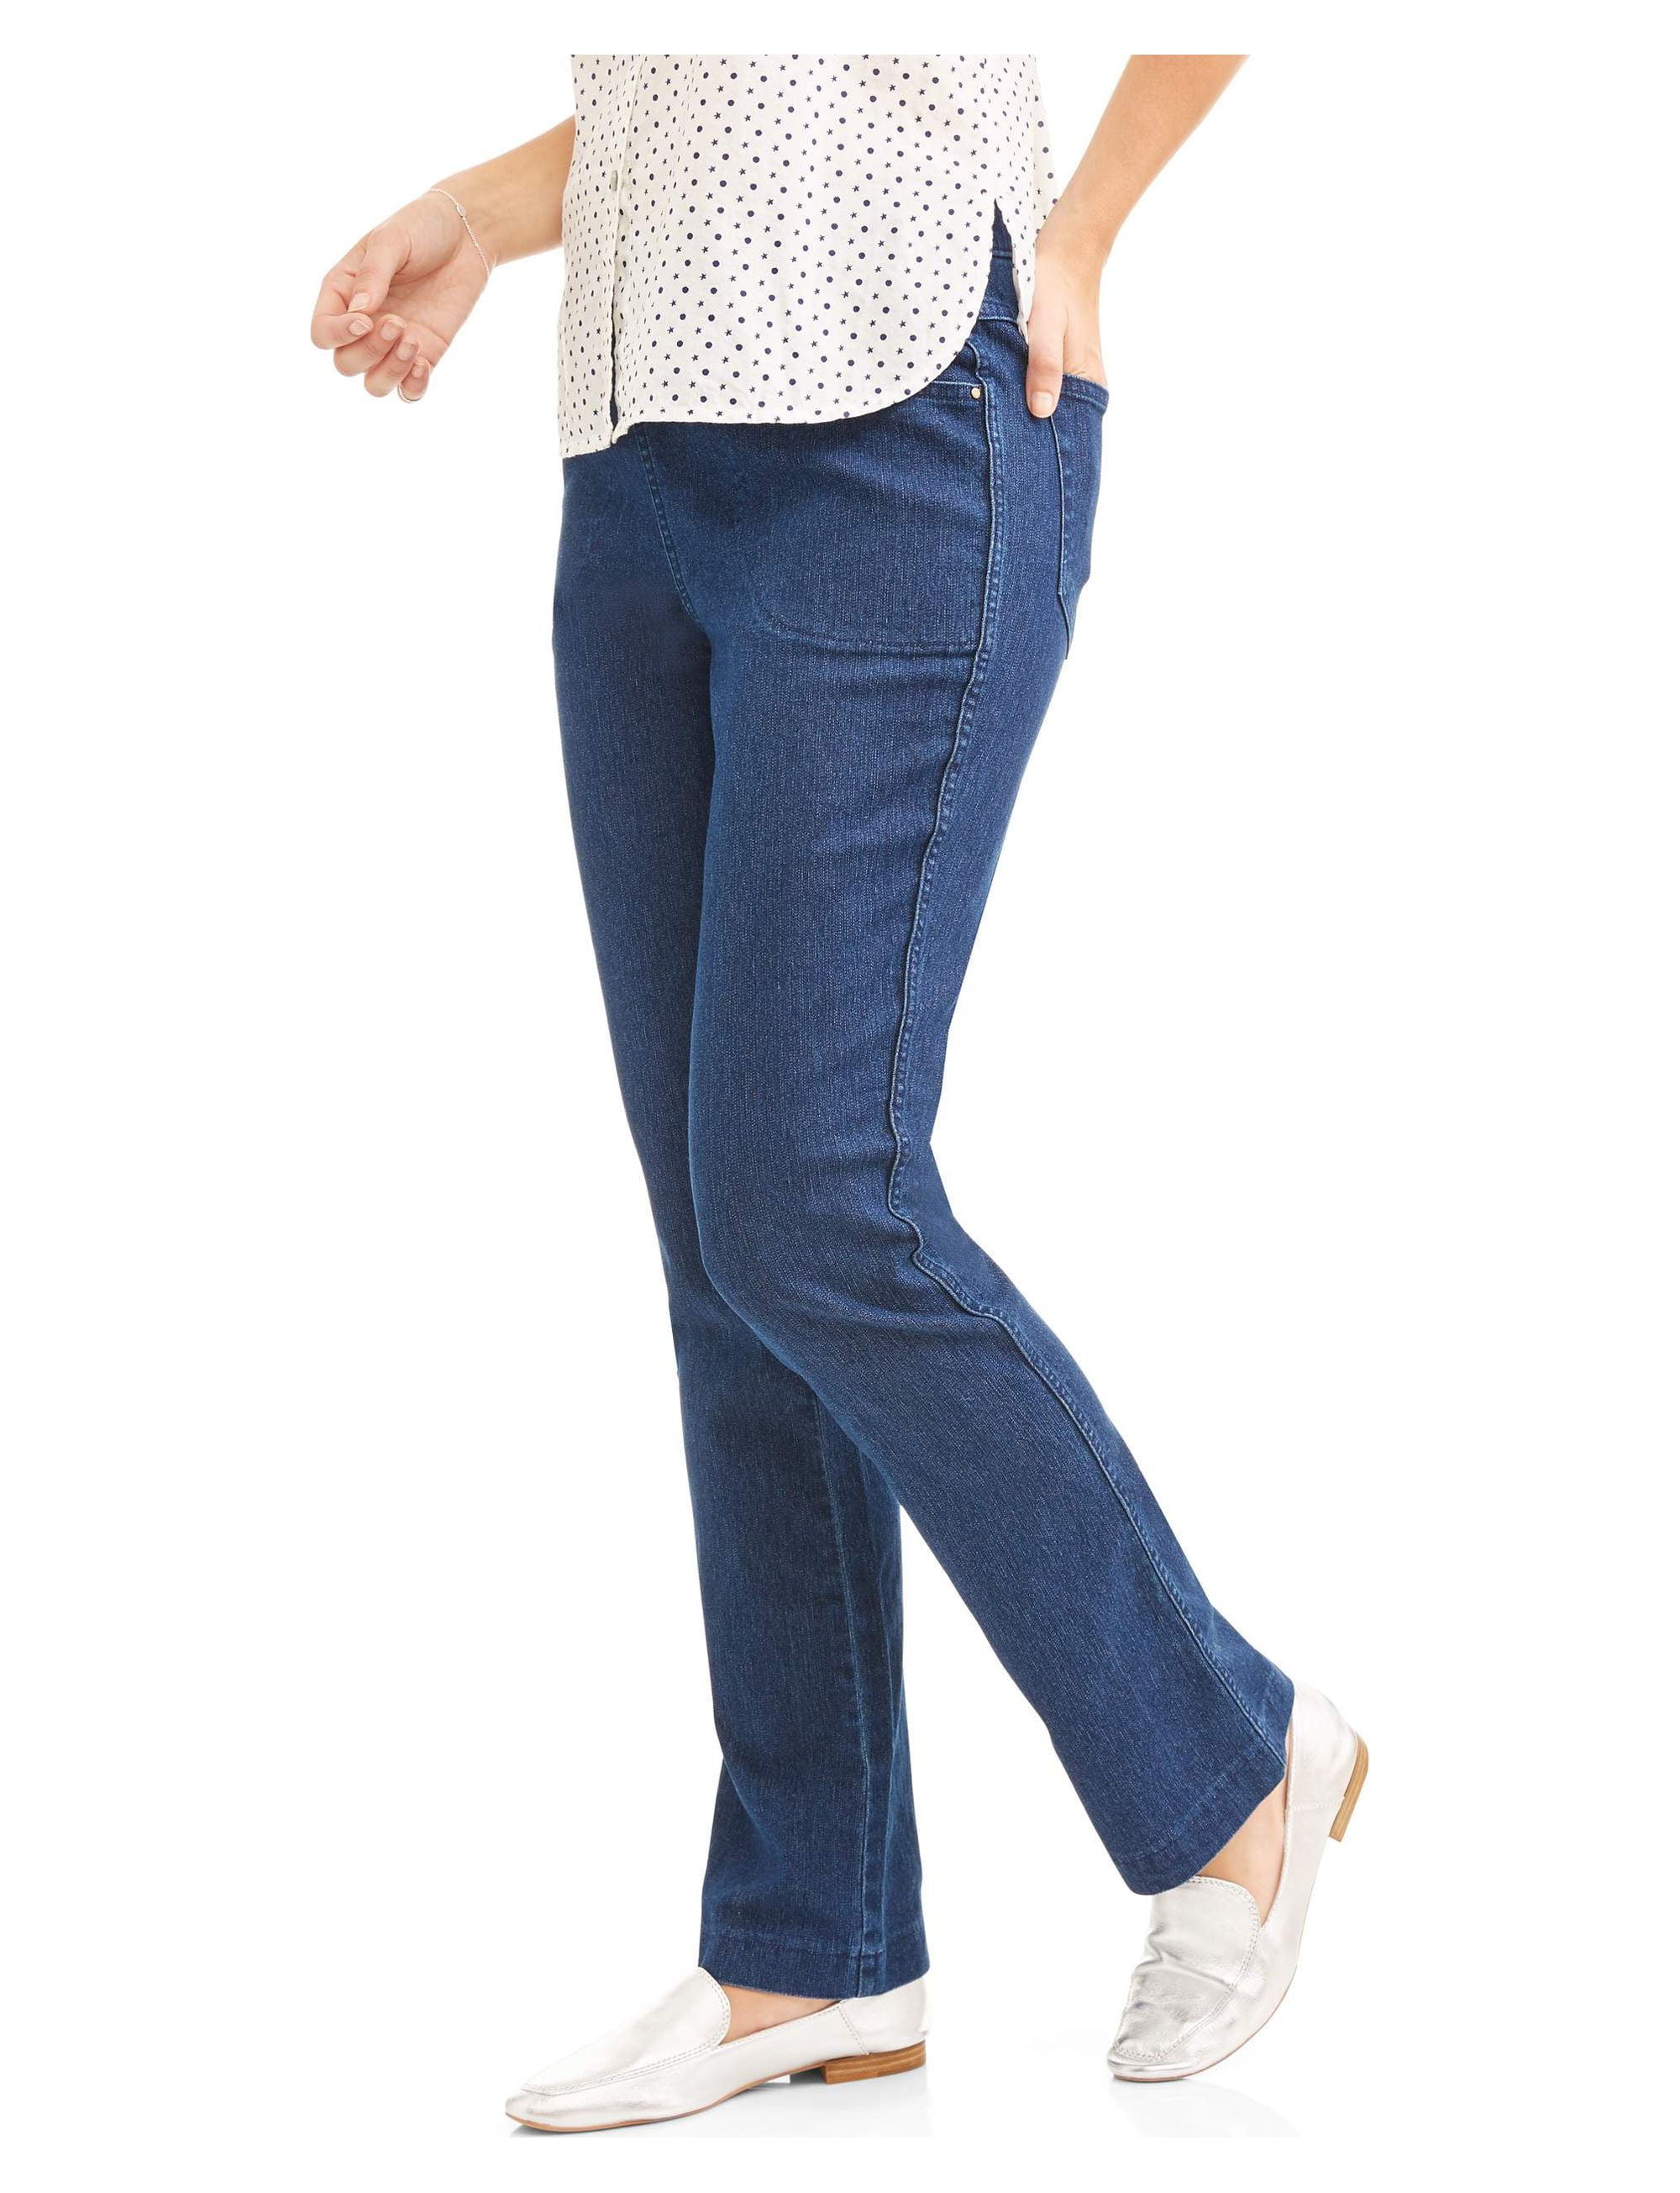 RealSize Women's 4 Pocket Stretch Pull On Bootcut Jeans, Sizes S-XXL ...